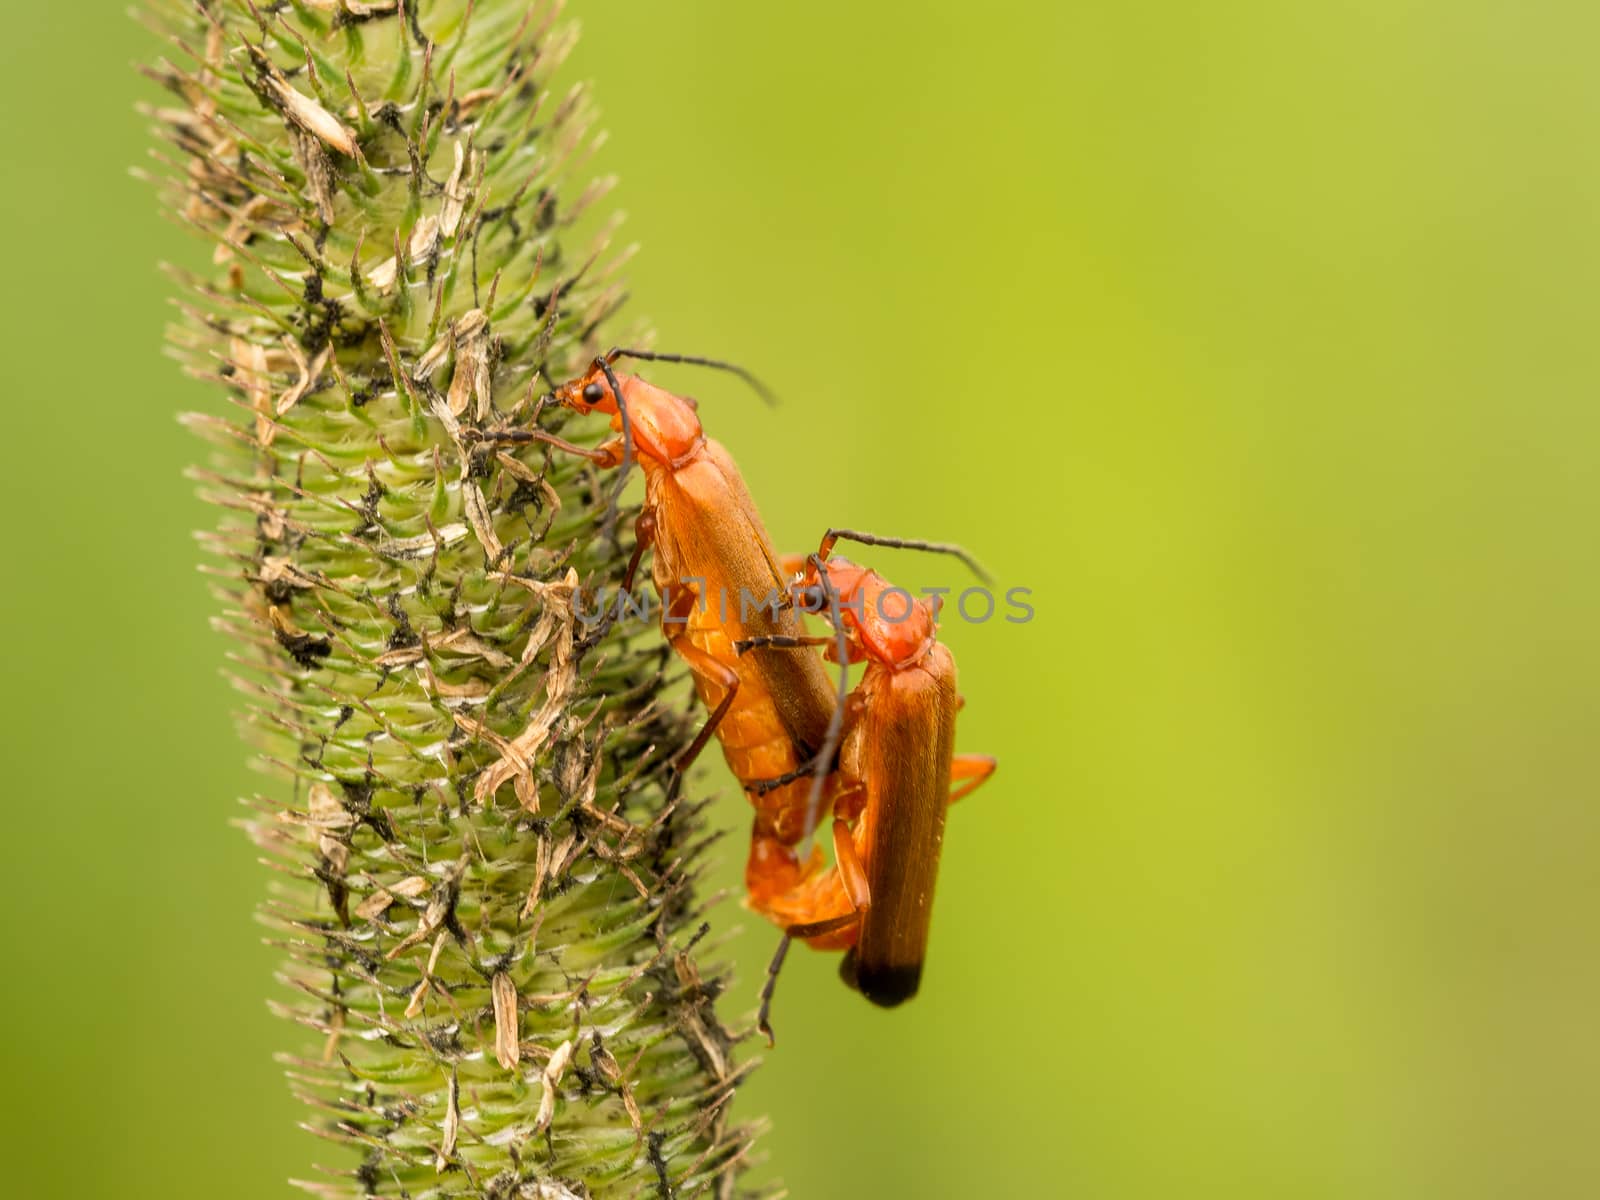 Two bugs on a stem by frankhoekzema